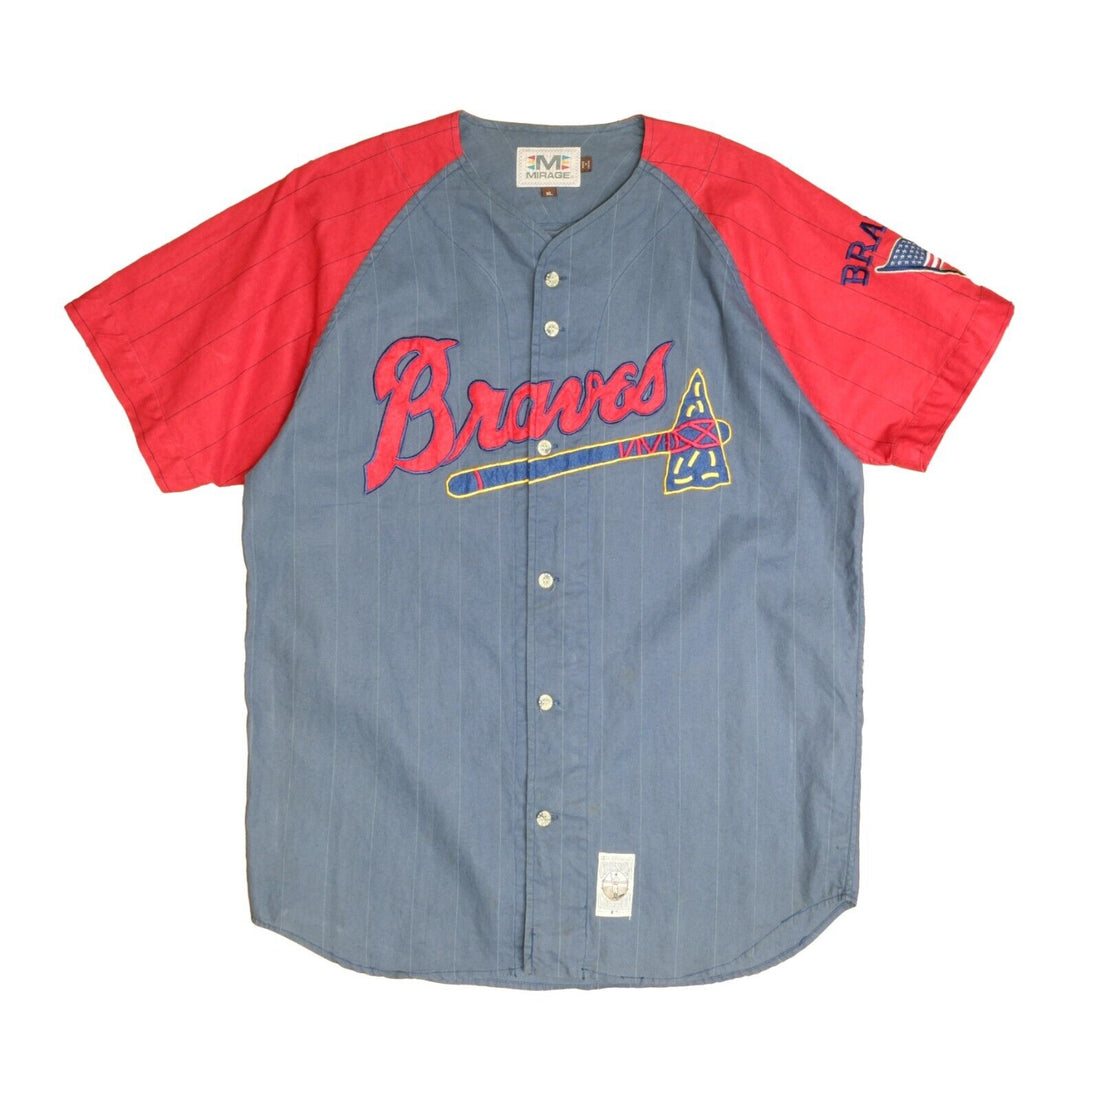 Atlanta Braves Mirage Baseball Jersey Size XL Cooperstown Collection MLB